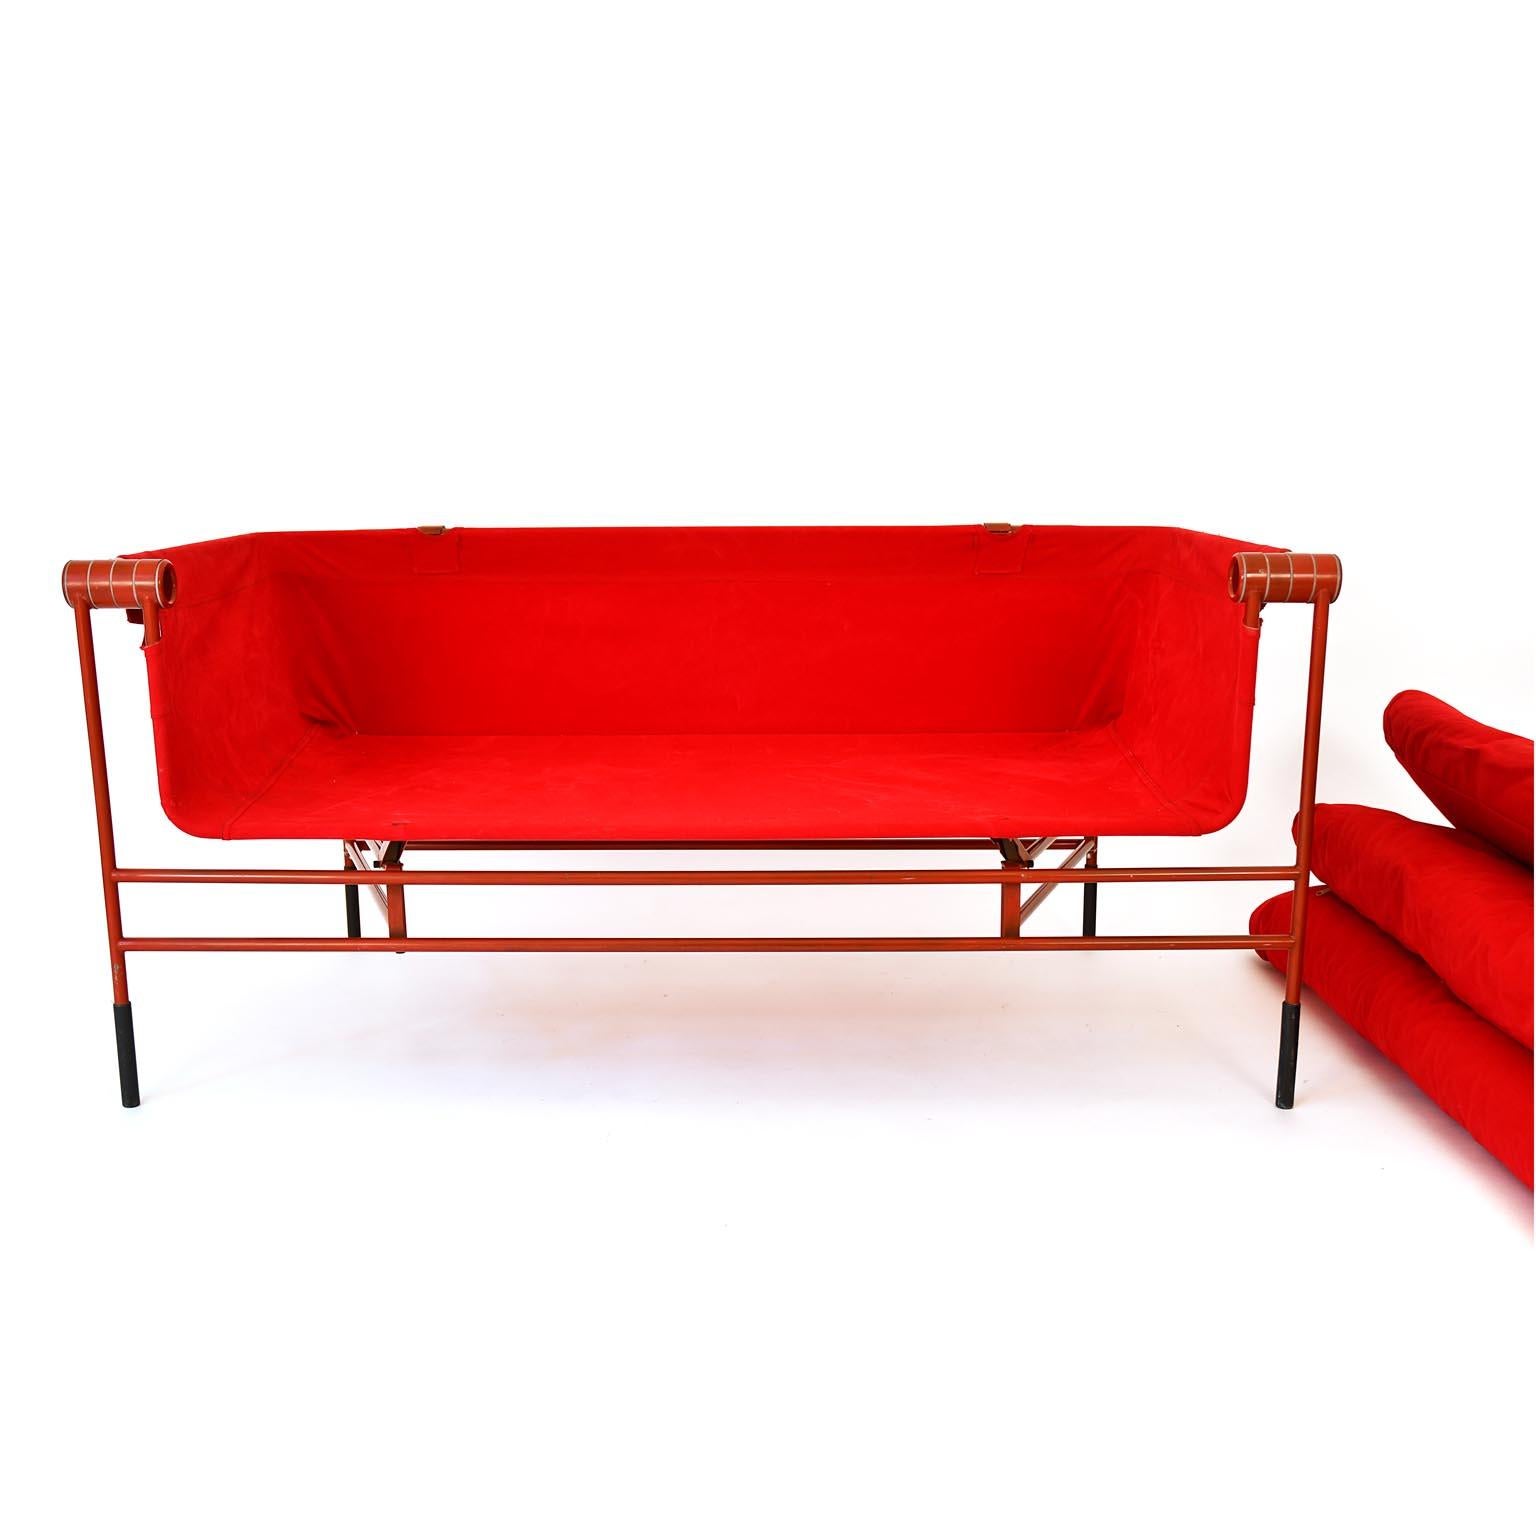 Modern Bench Cabriolet 1980s Red Fabrik Metal Bruno Rota Italy